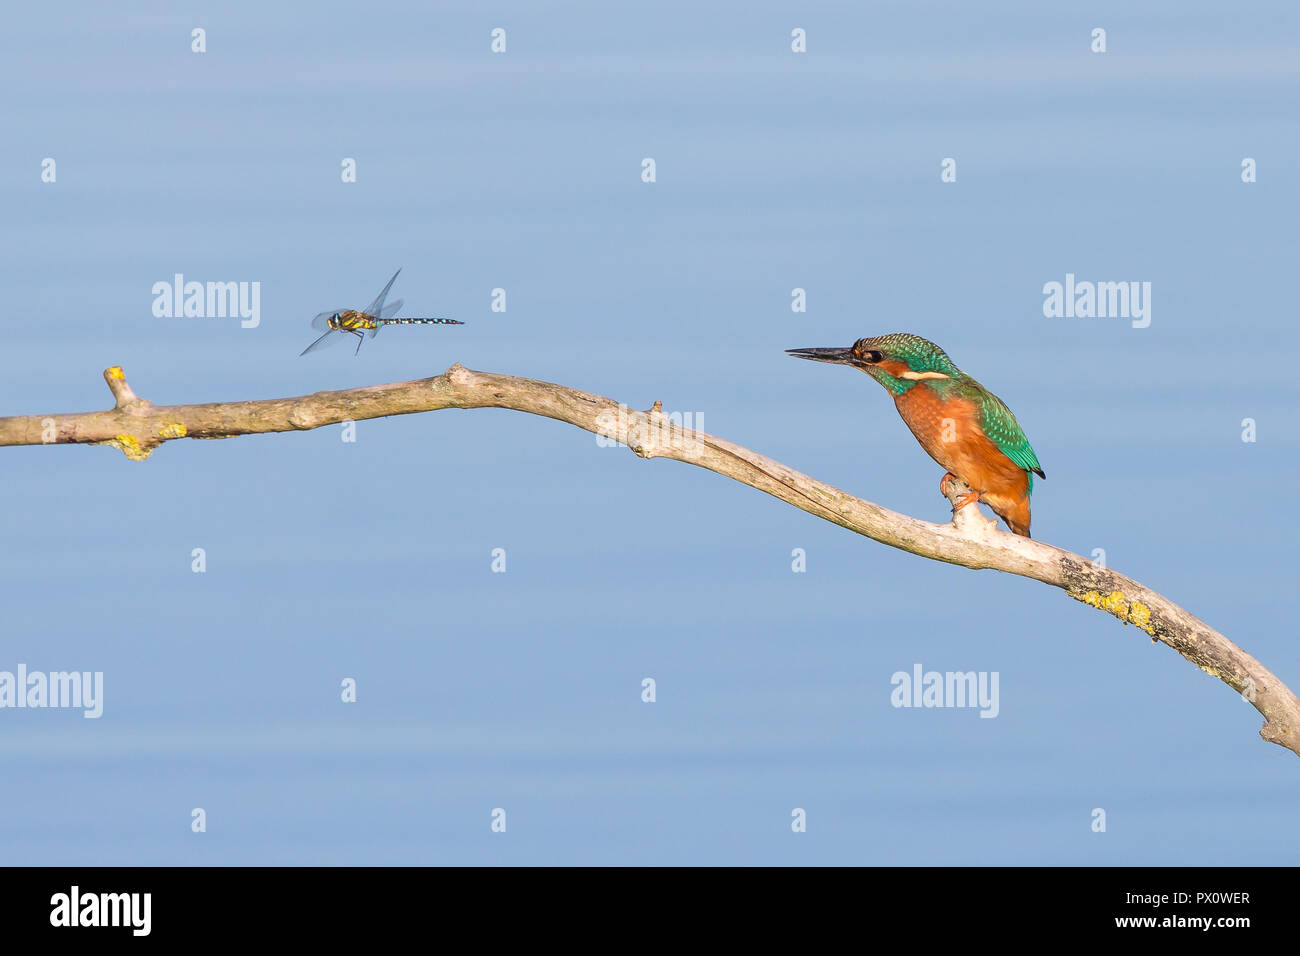 Comical side view of wild, hungry, common kingfisher bird (Alcedo atthis) isolated perching on branch over water, staring at hovering dragonfly prey. Stock Photo